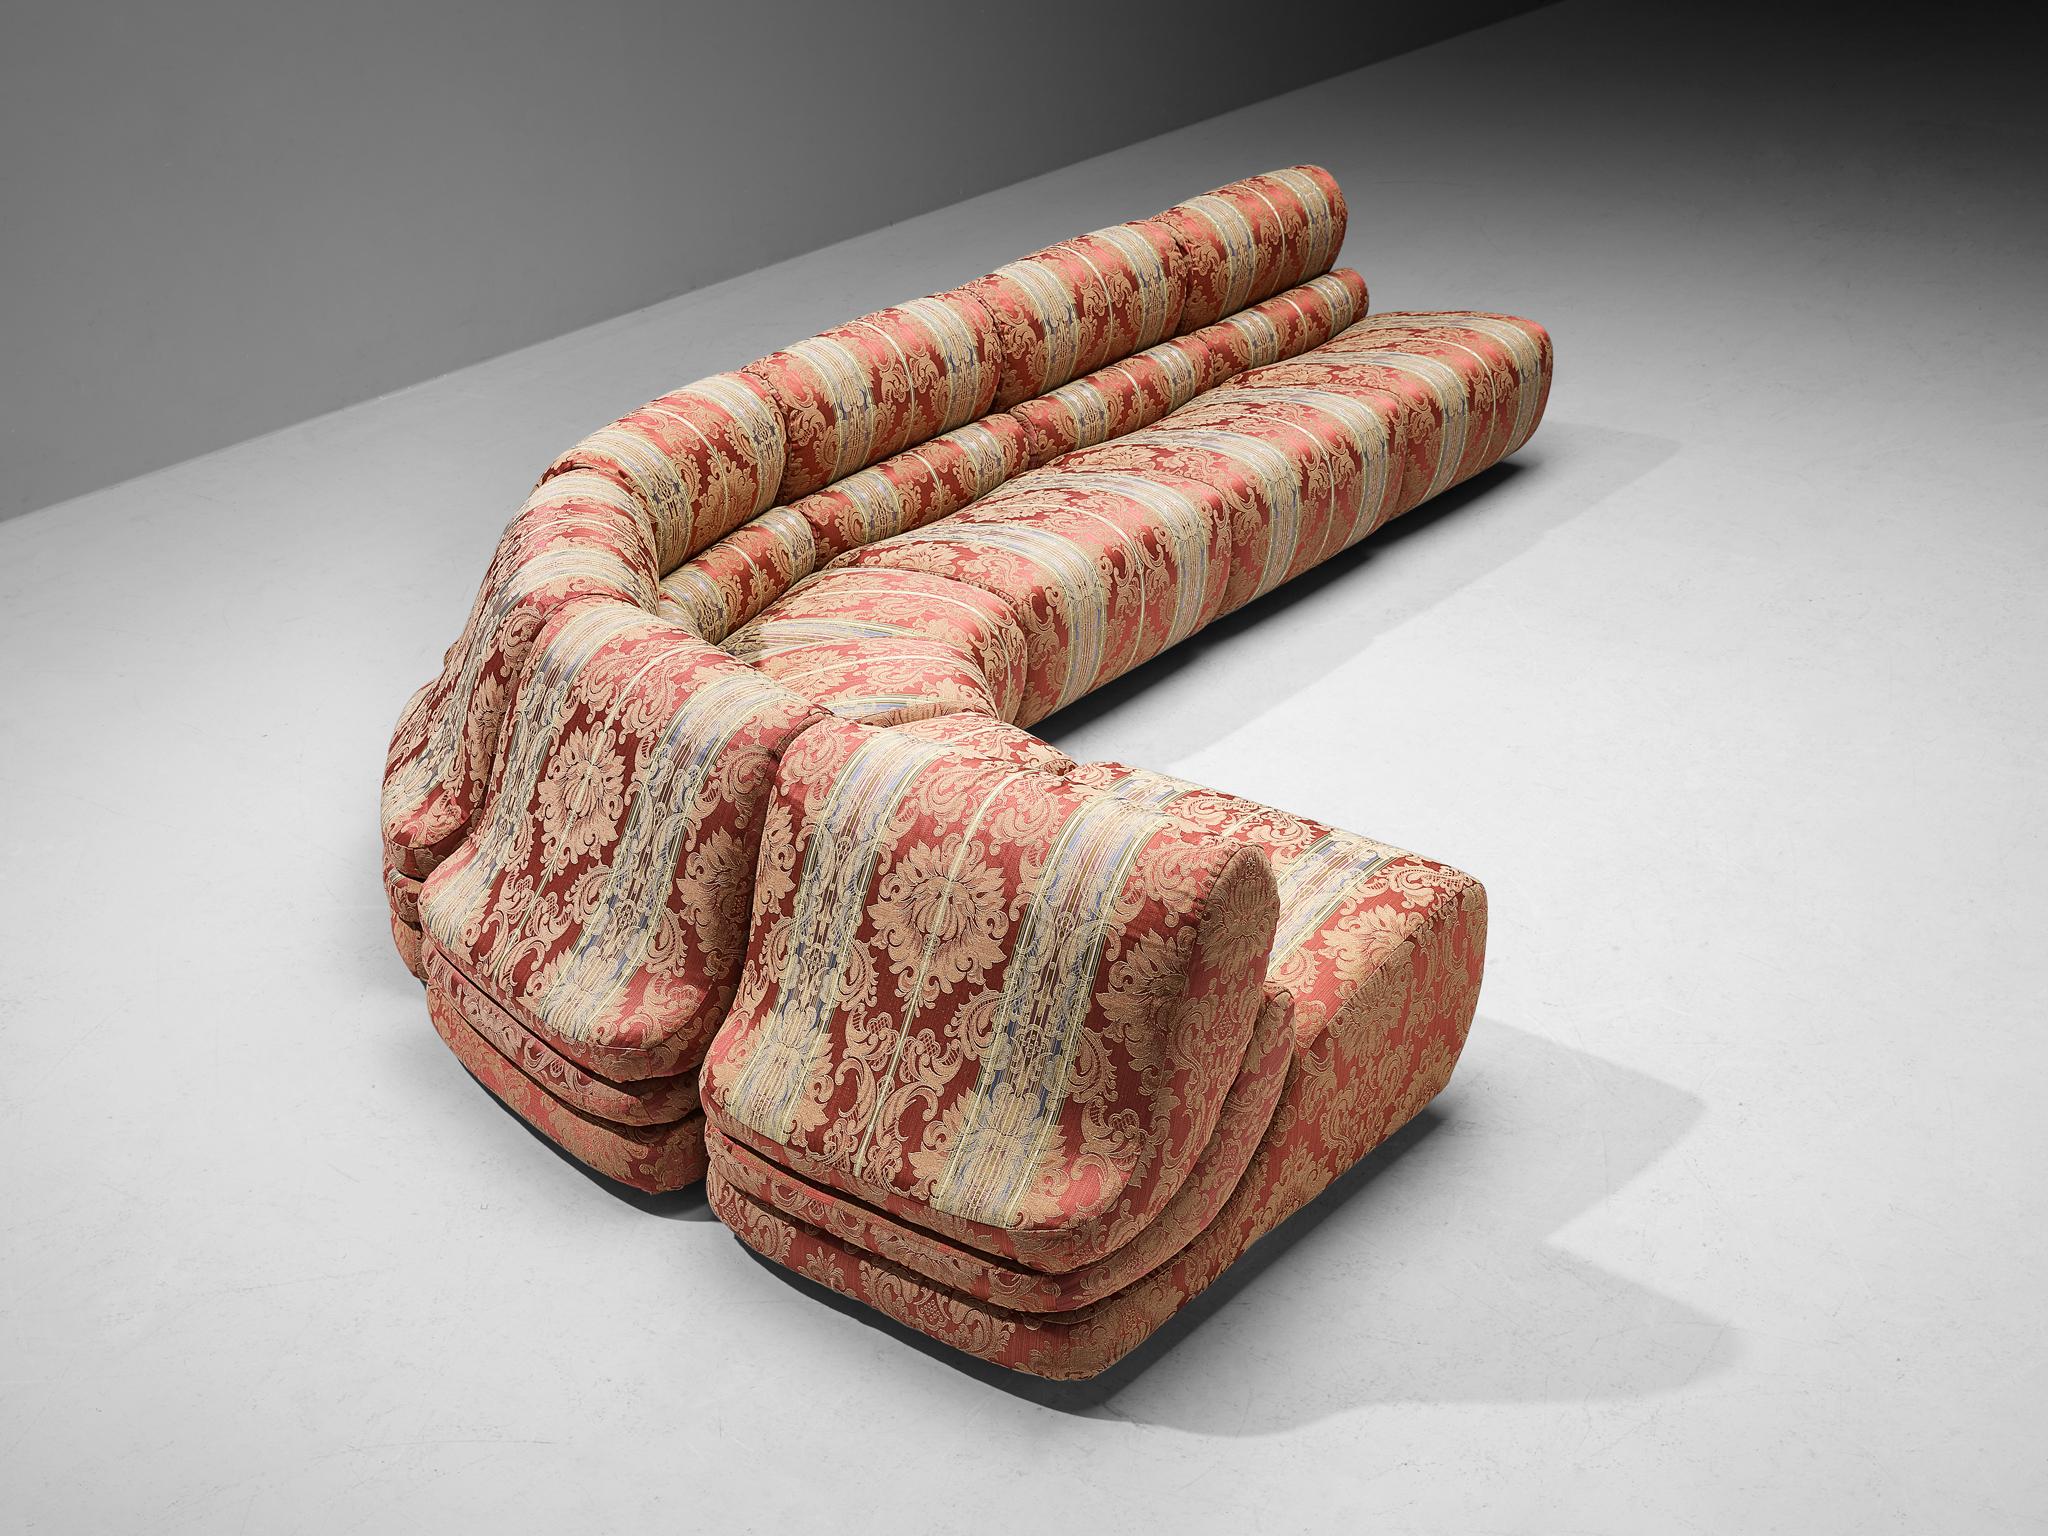 Modular sofa, fabric, Italy, 1970s

This grandiose characteristic sofa of Italian origin finds itself at the intersection of art and furniture design. The modular sofa contains four regular elements and three corner pieces, making it possible to